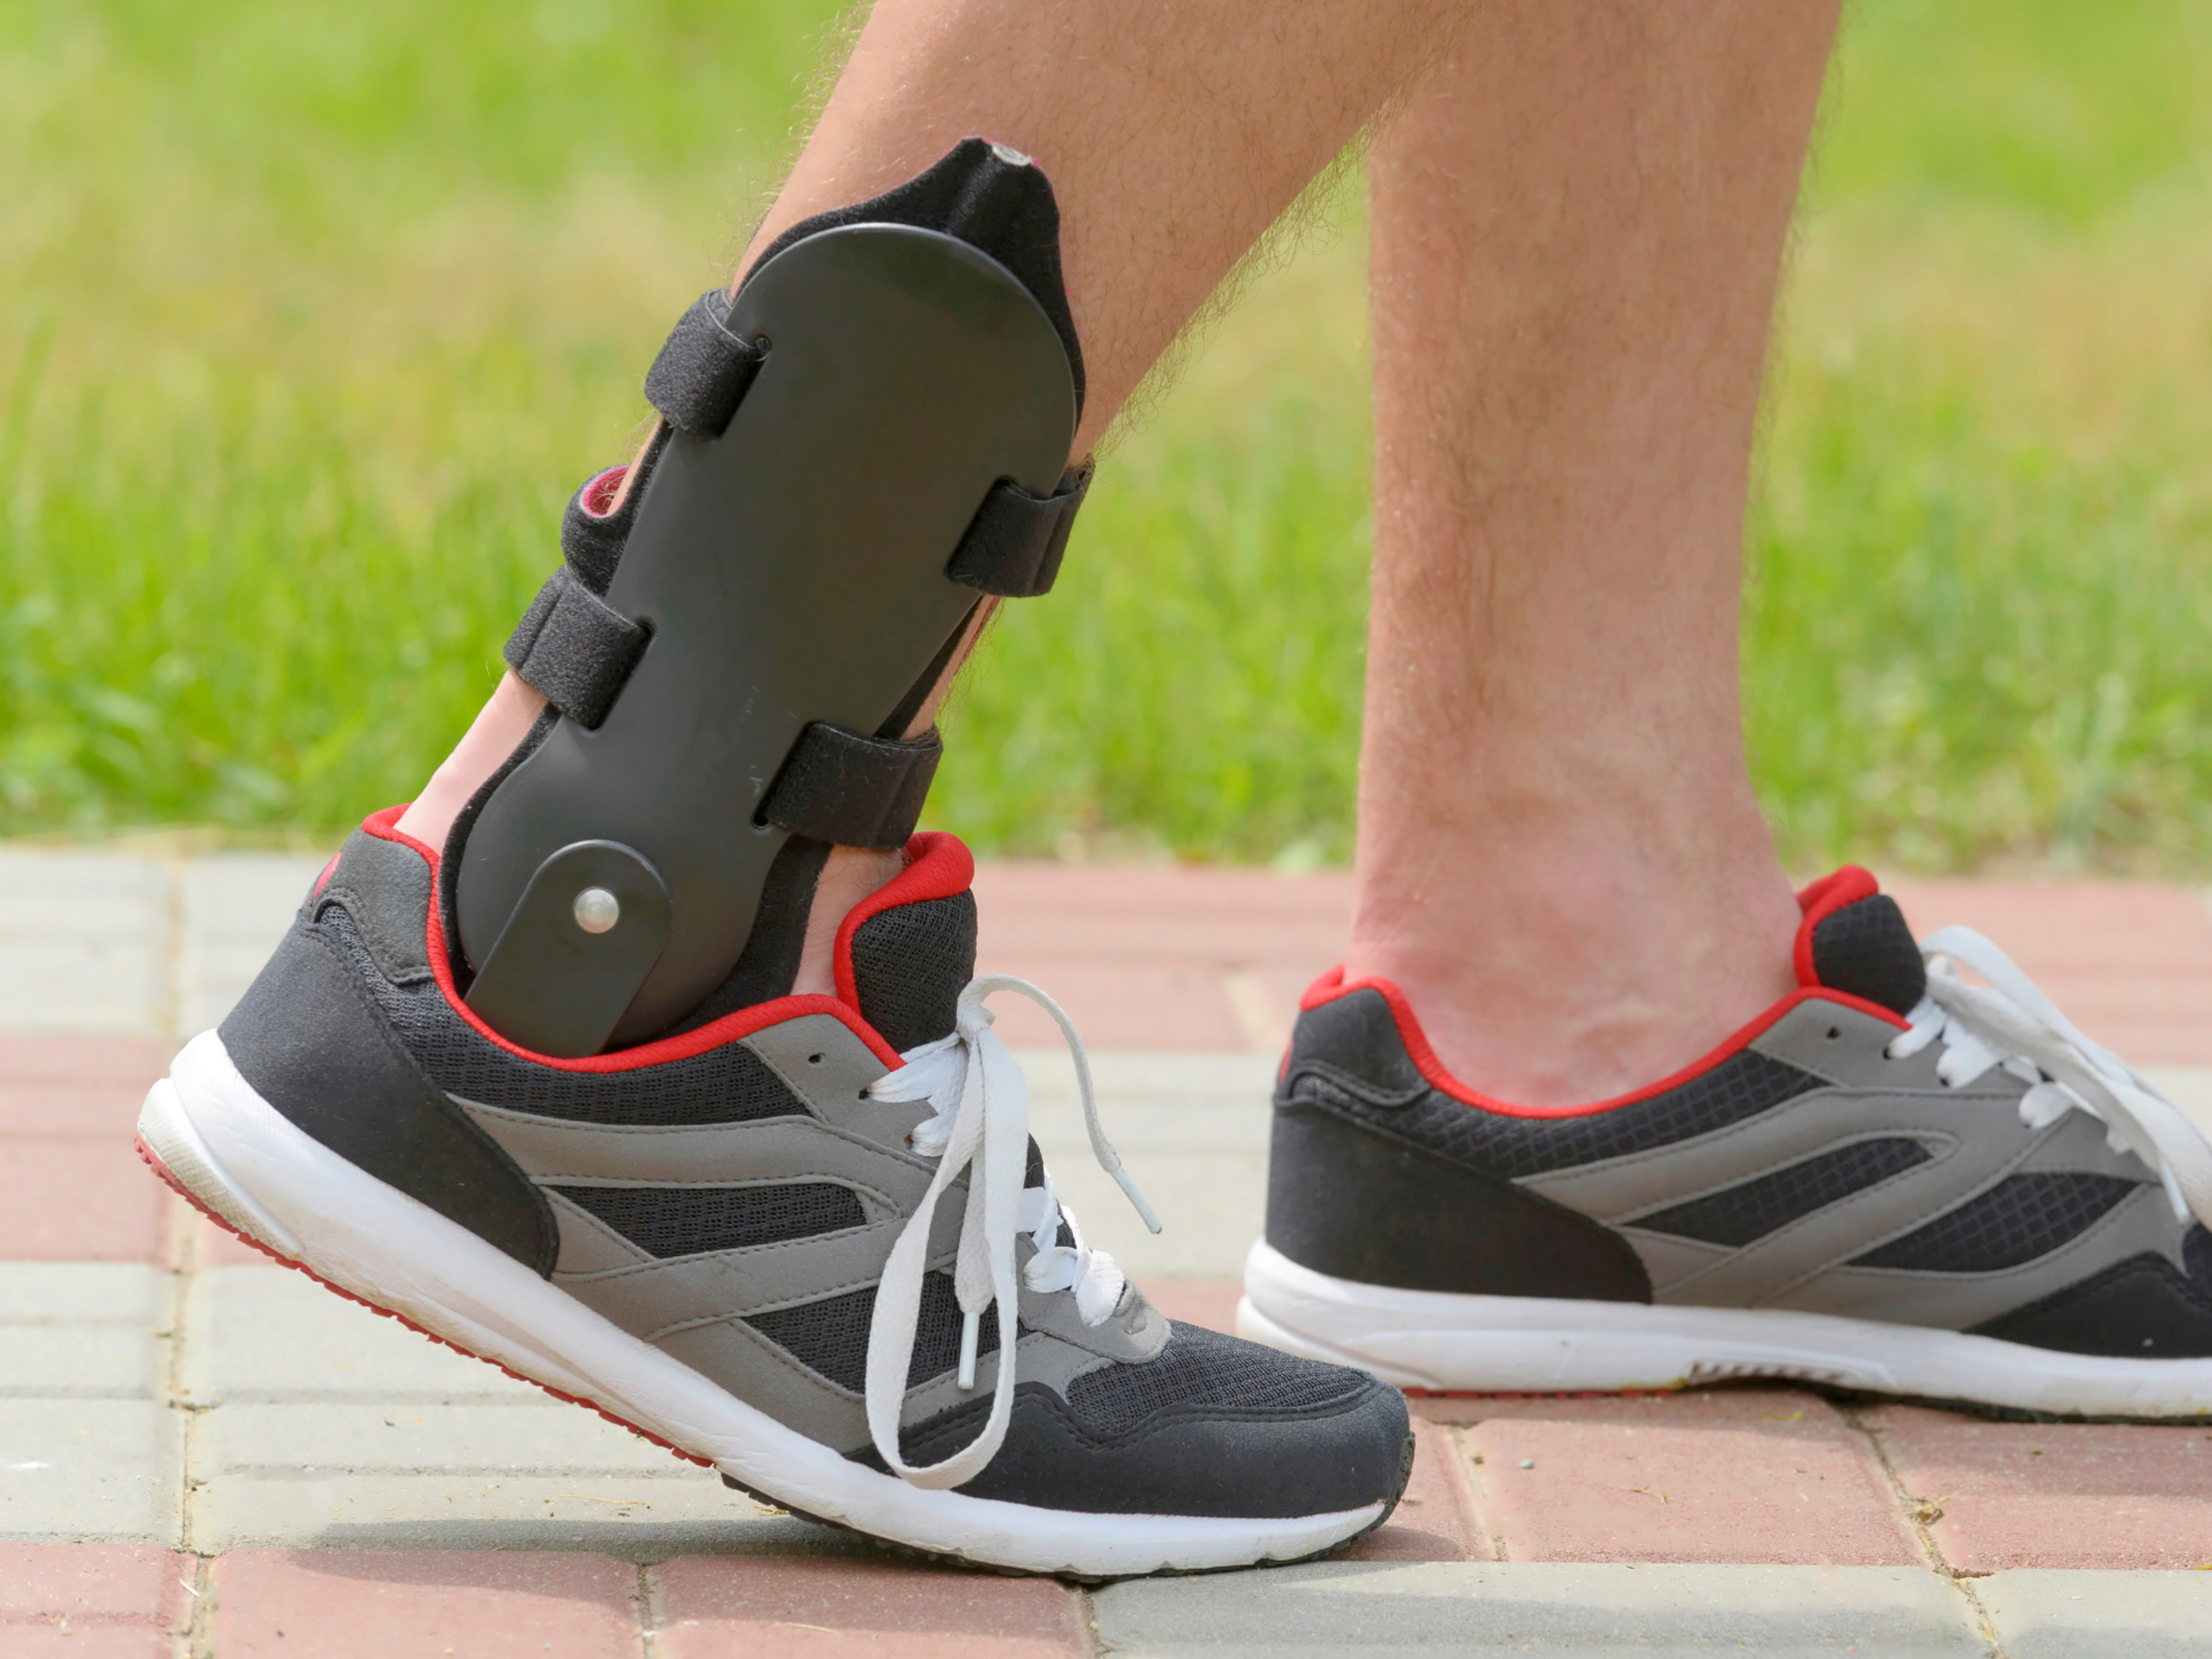 Ankle sprain braces work by restricting the inversion and eversion range of motion so that you can walk and run without straining your ligaments.